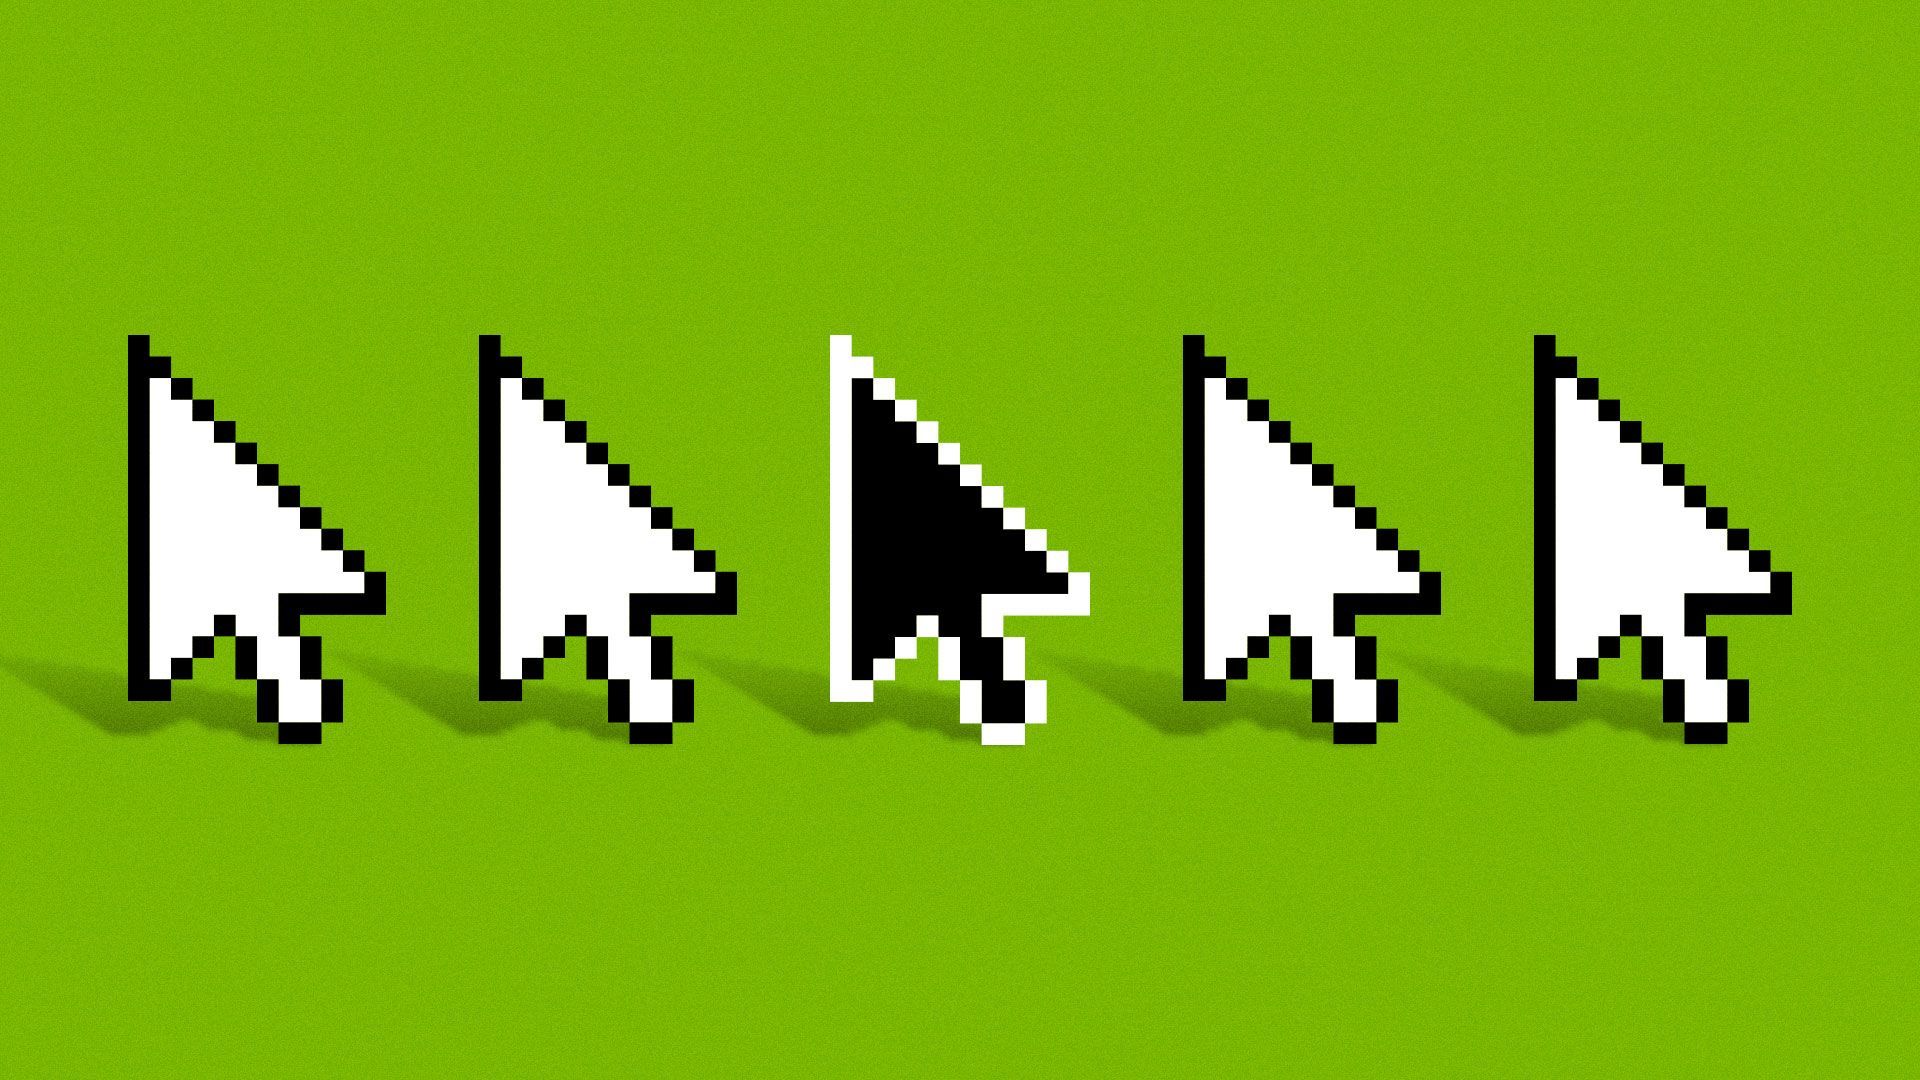 Illustration of one black cursor in a row of white cursors